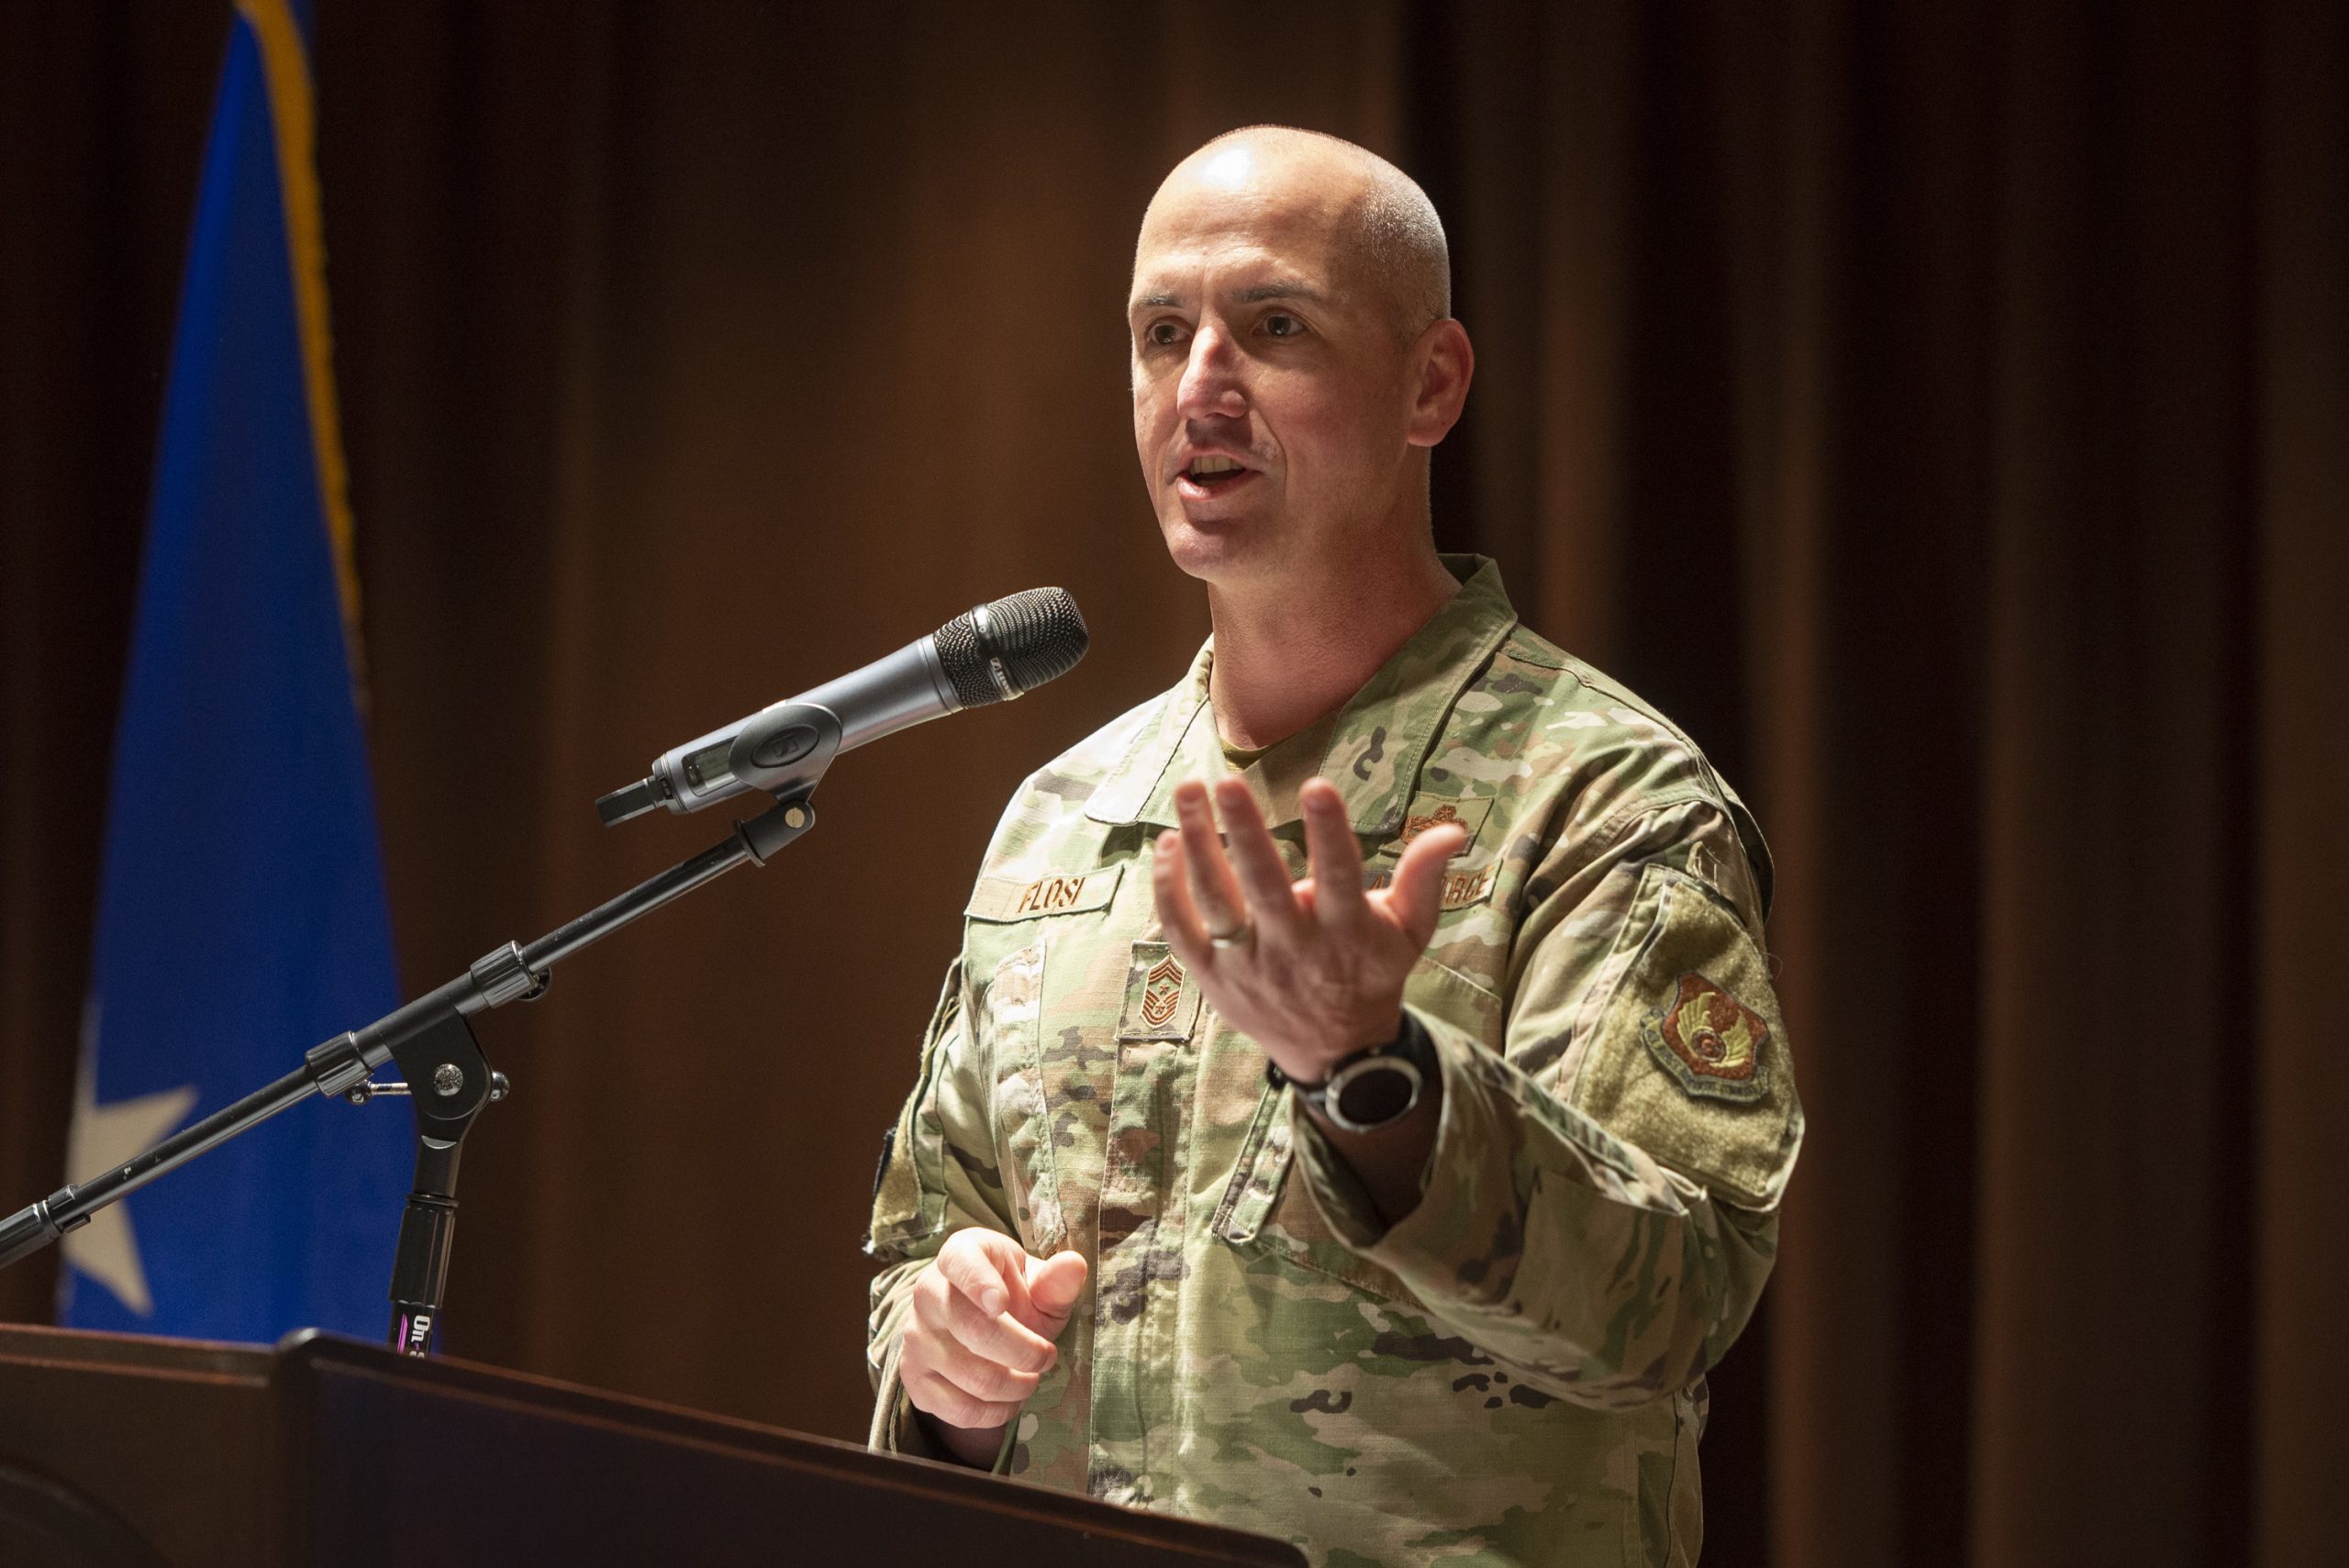 New CMSAF: David Flosi Selected as Top Enlisted Airman